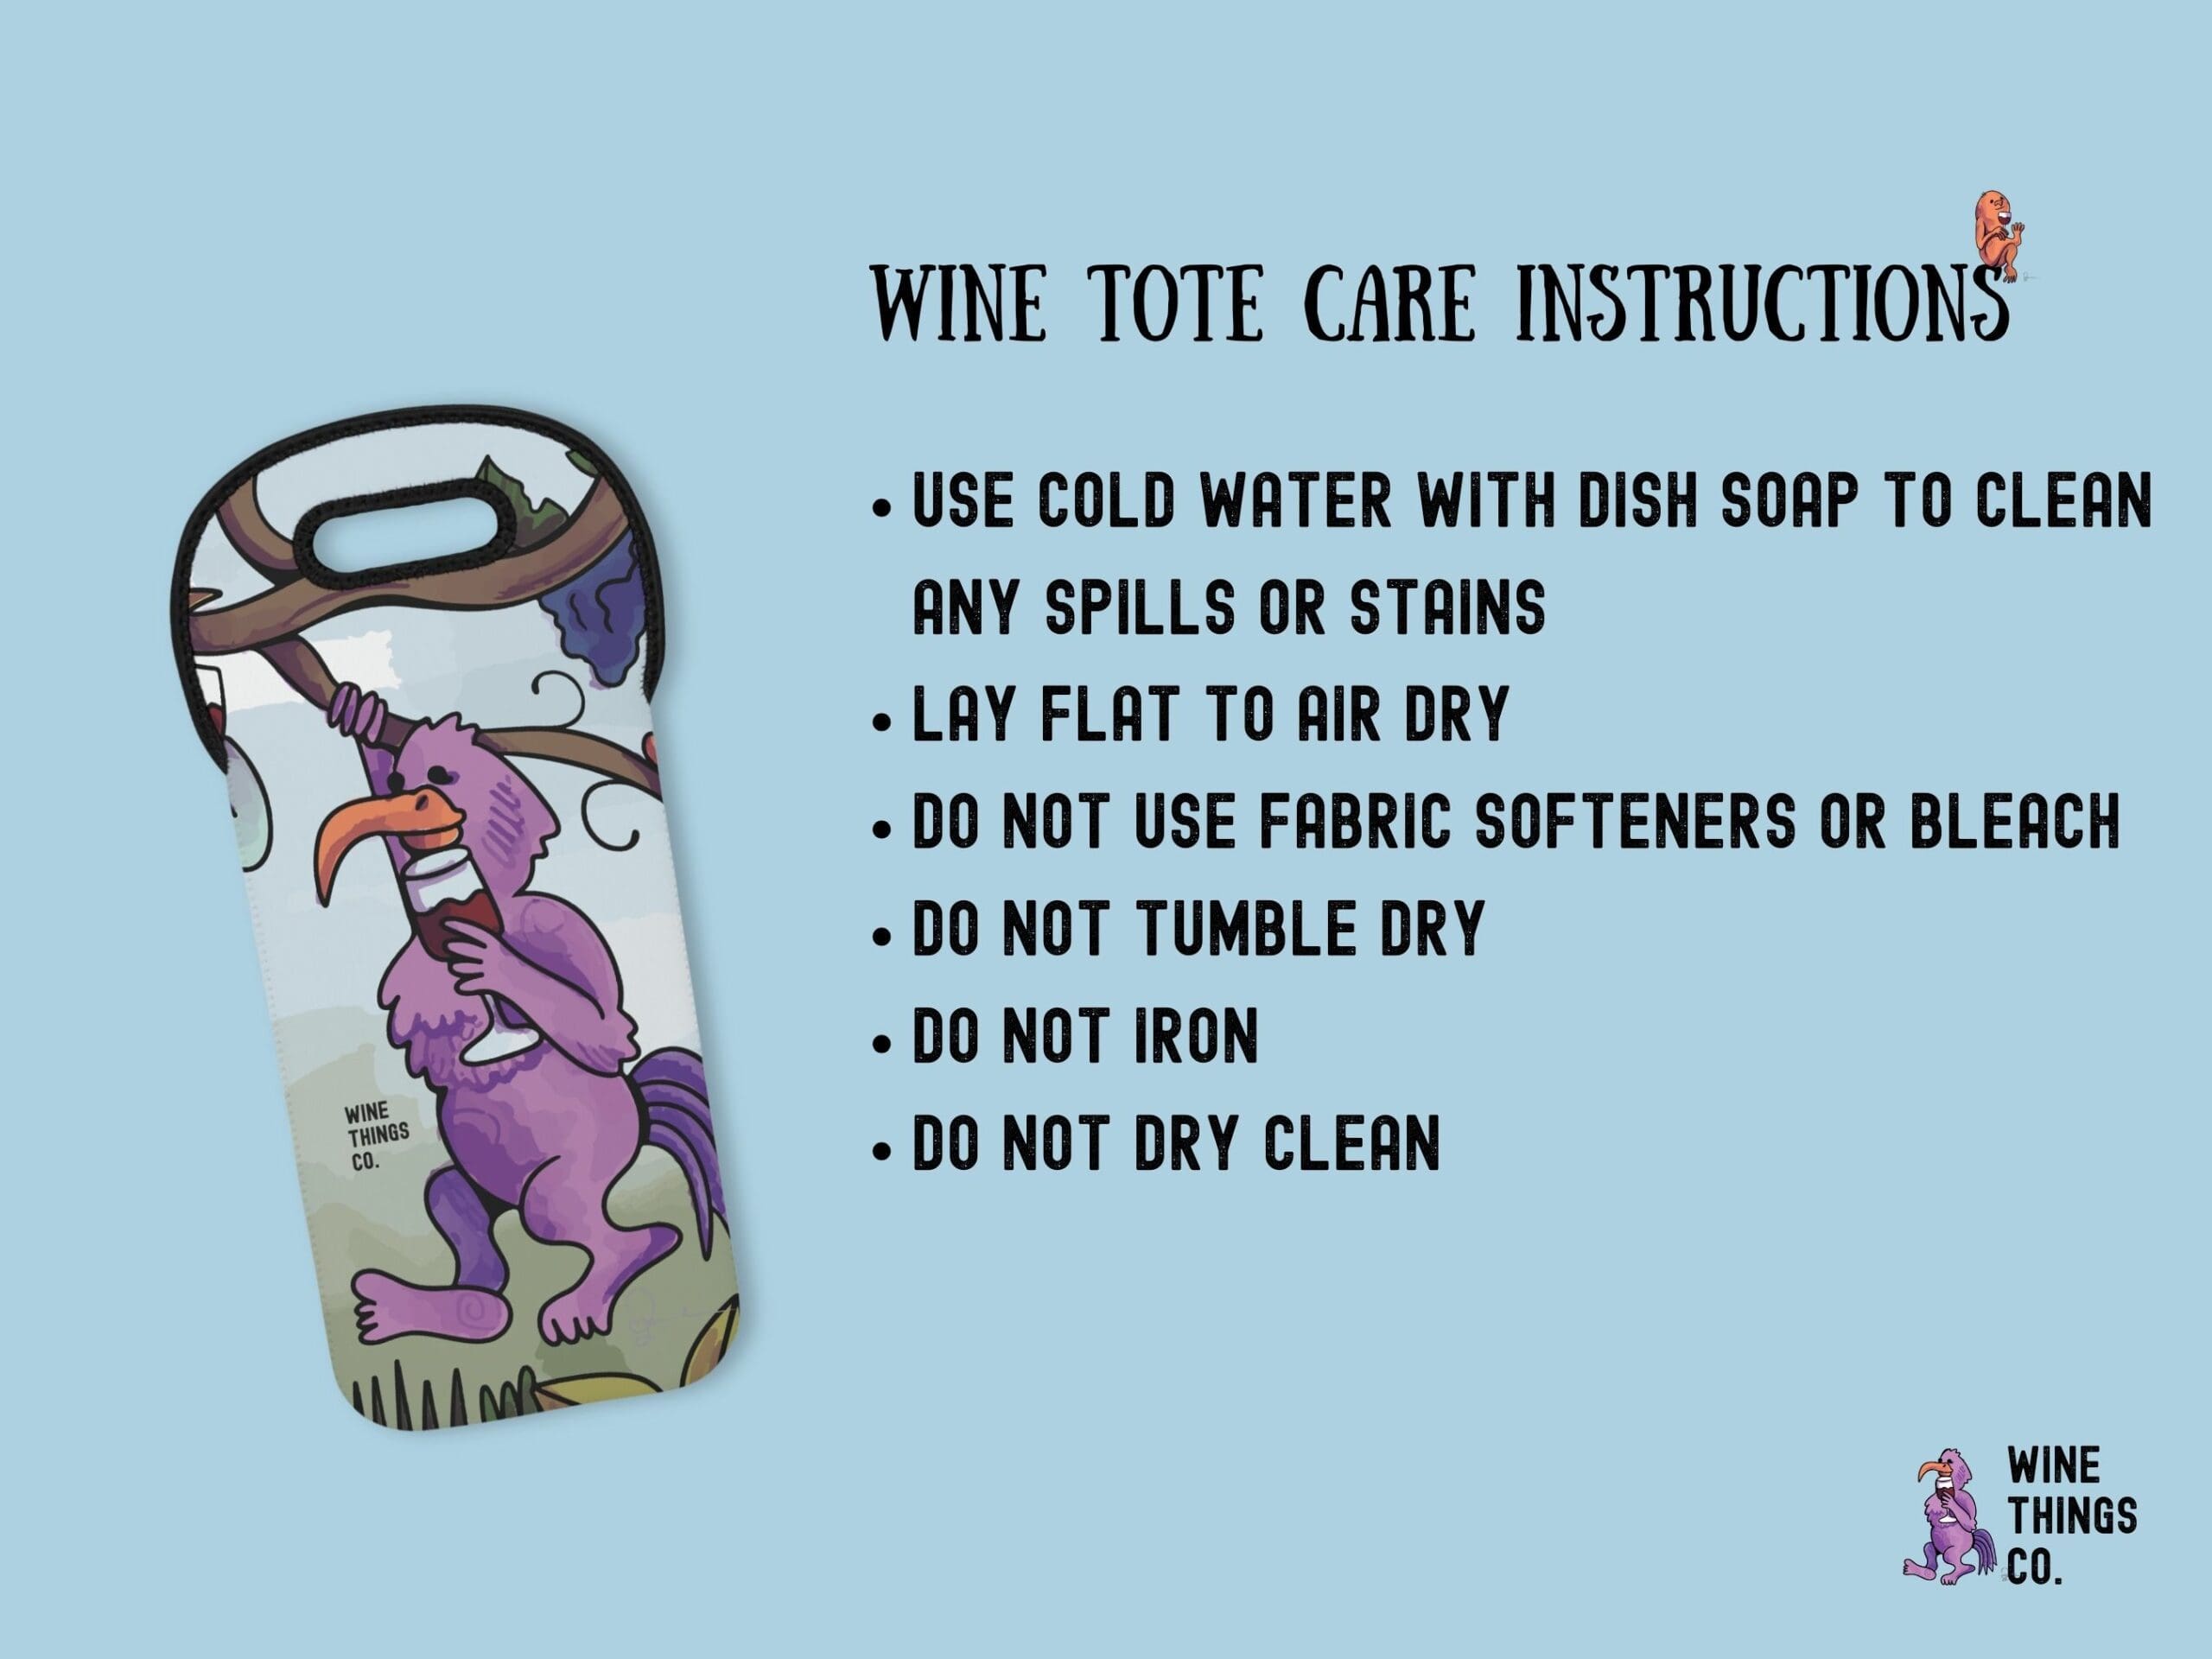 Wine tote care instructions provided by Safi Marketplace.